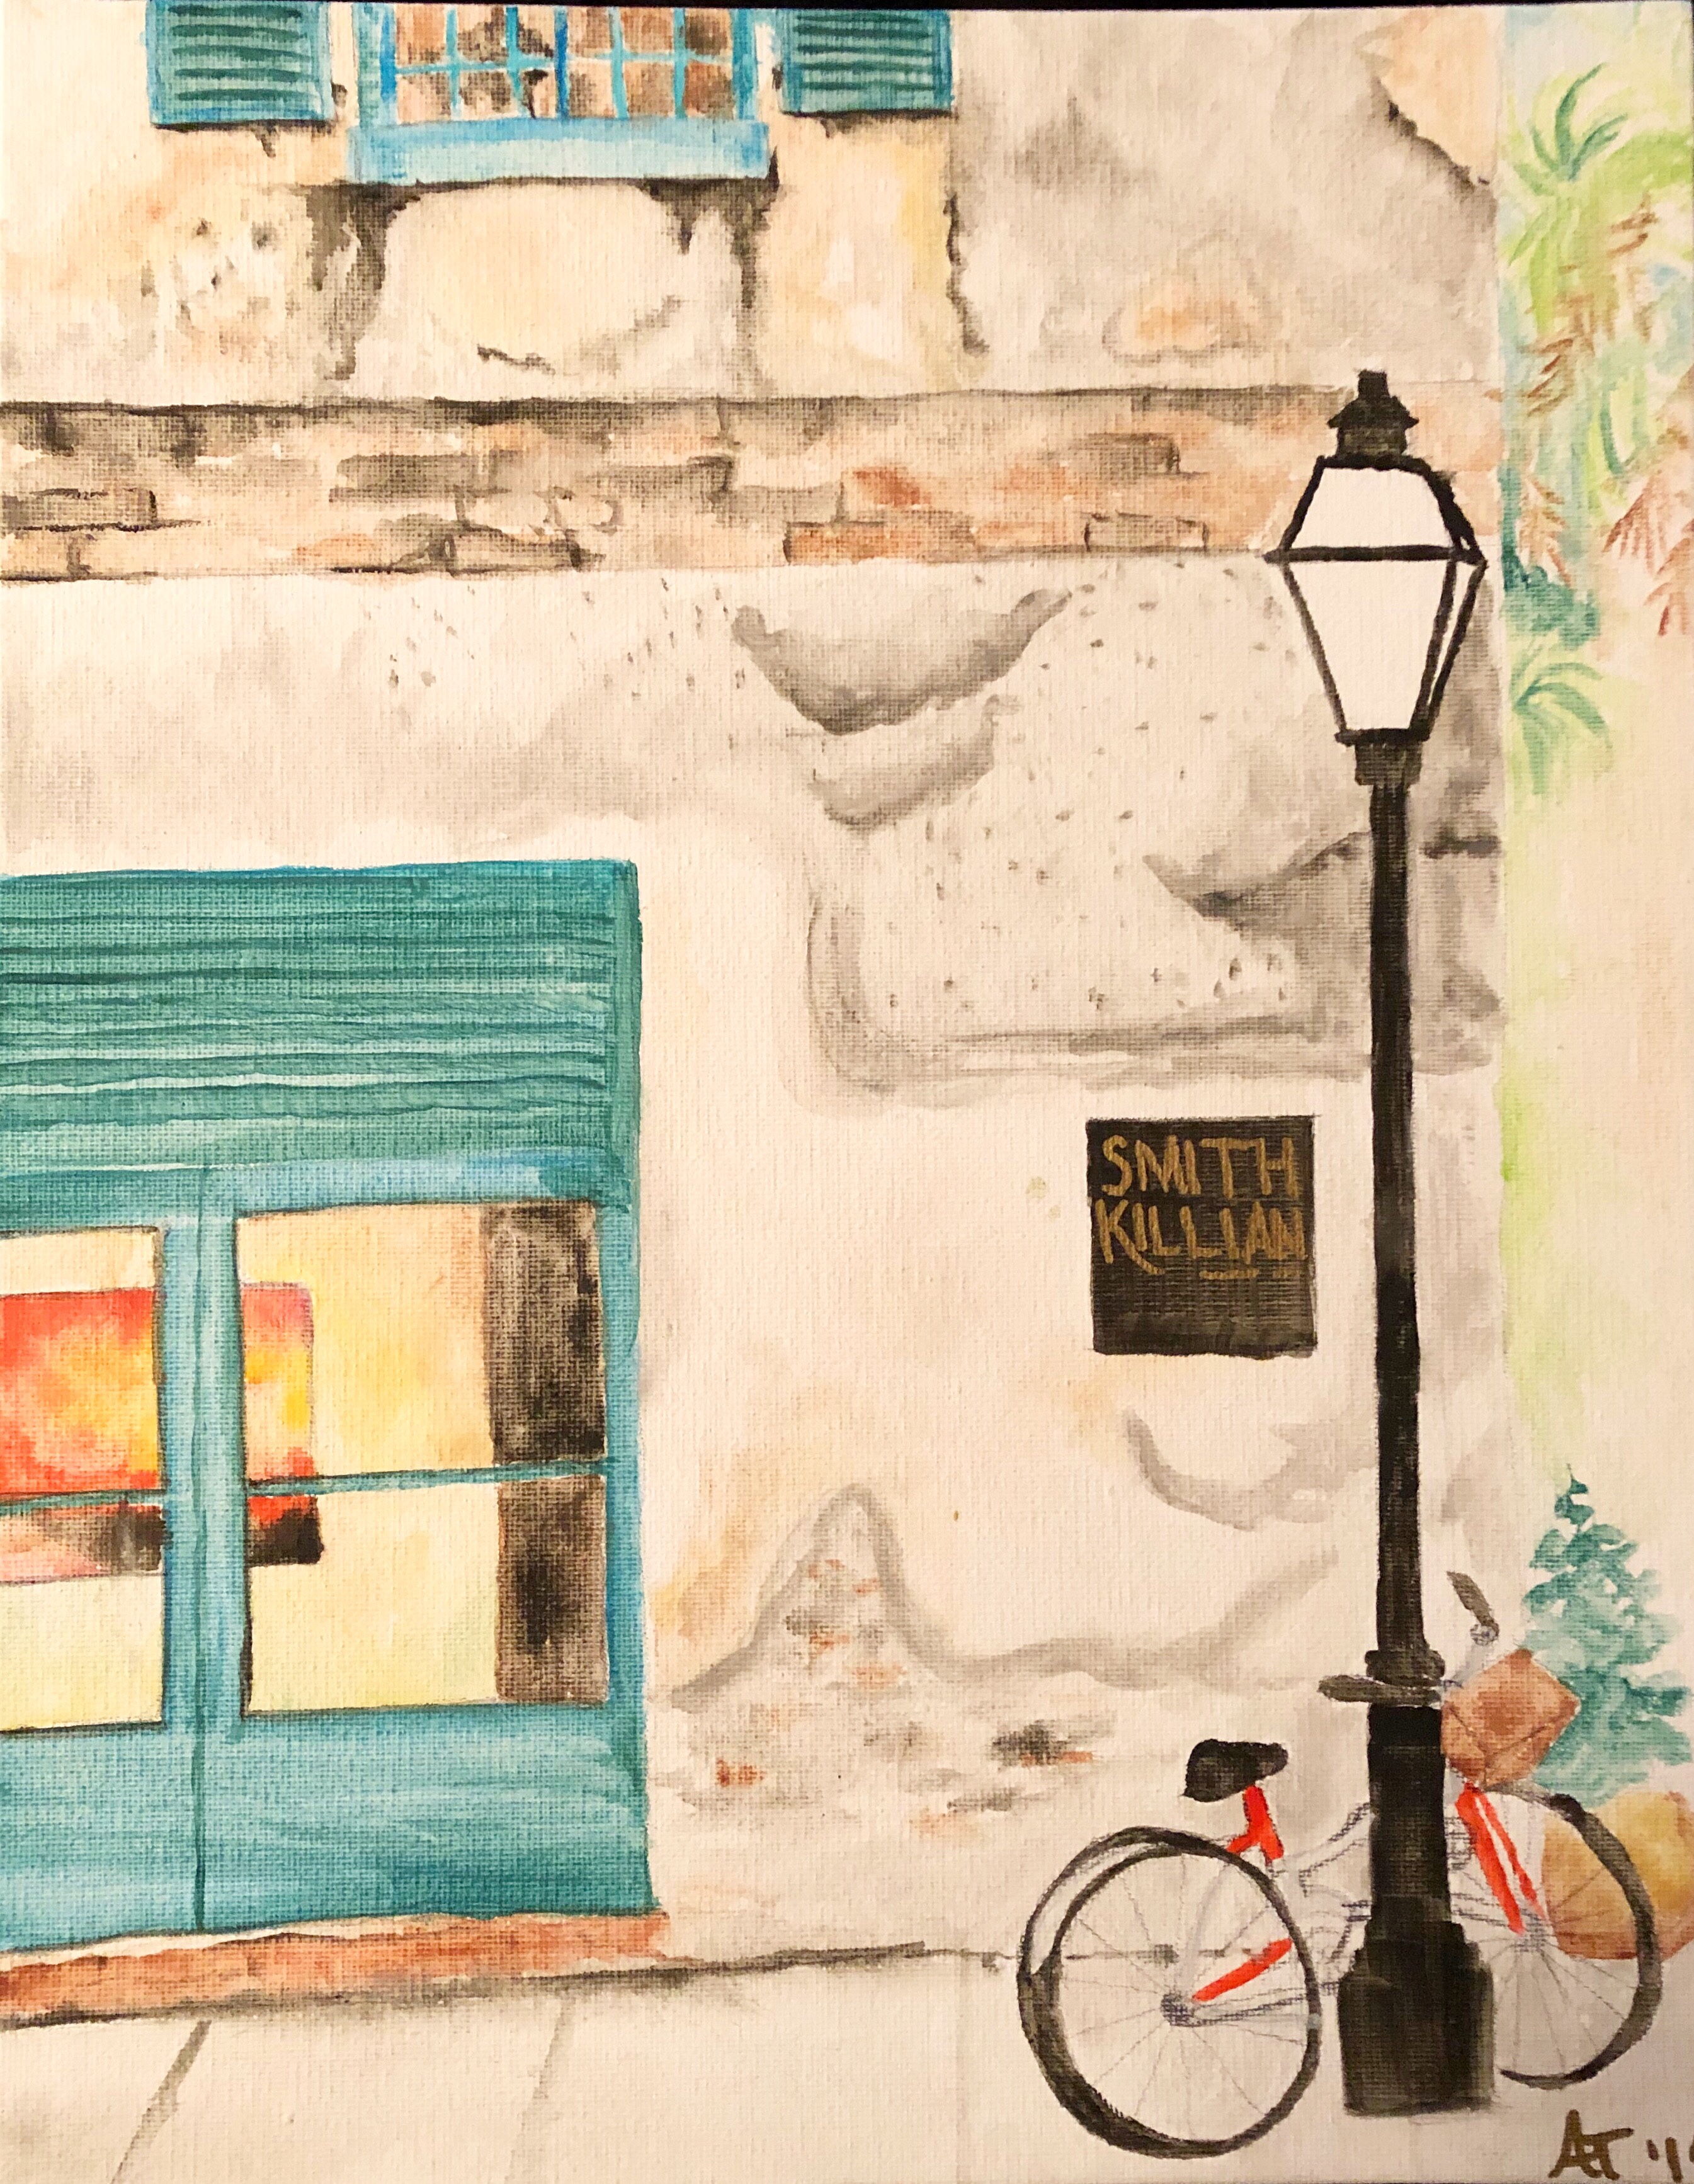 A close up of the corner of an art gallery. The building is concrete and has many weathered areas. Two large blue doors sit on the far left with a view into the art gallery. A black Smith Killian sign hangs on the right. A black lamp post with a red bike propped against it blocks the sidewalk on the right side of the painting.